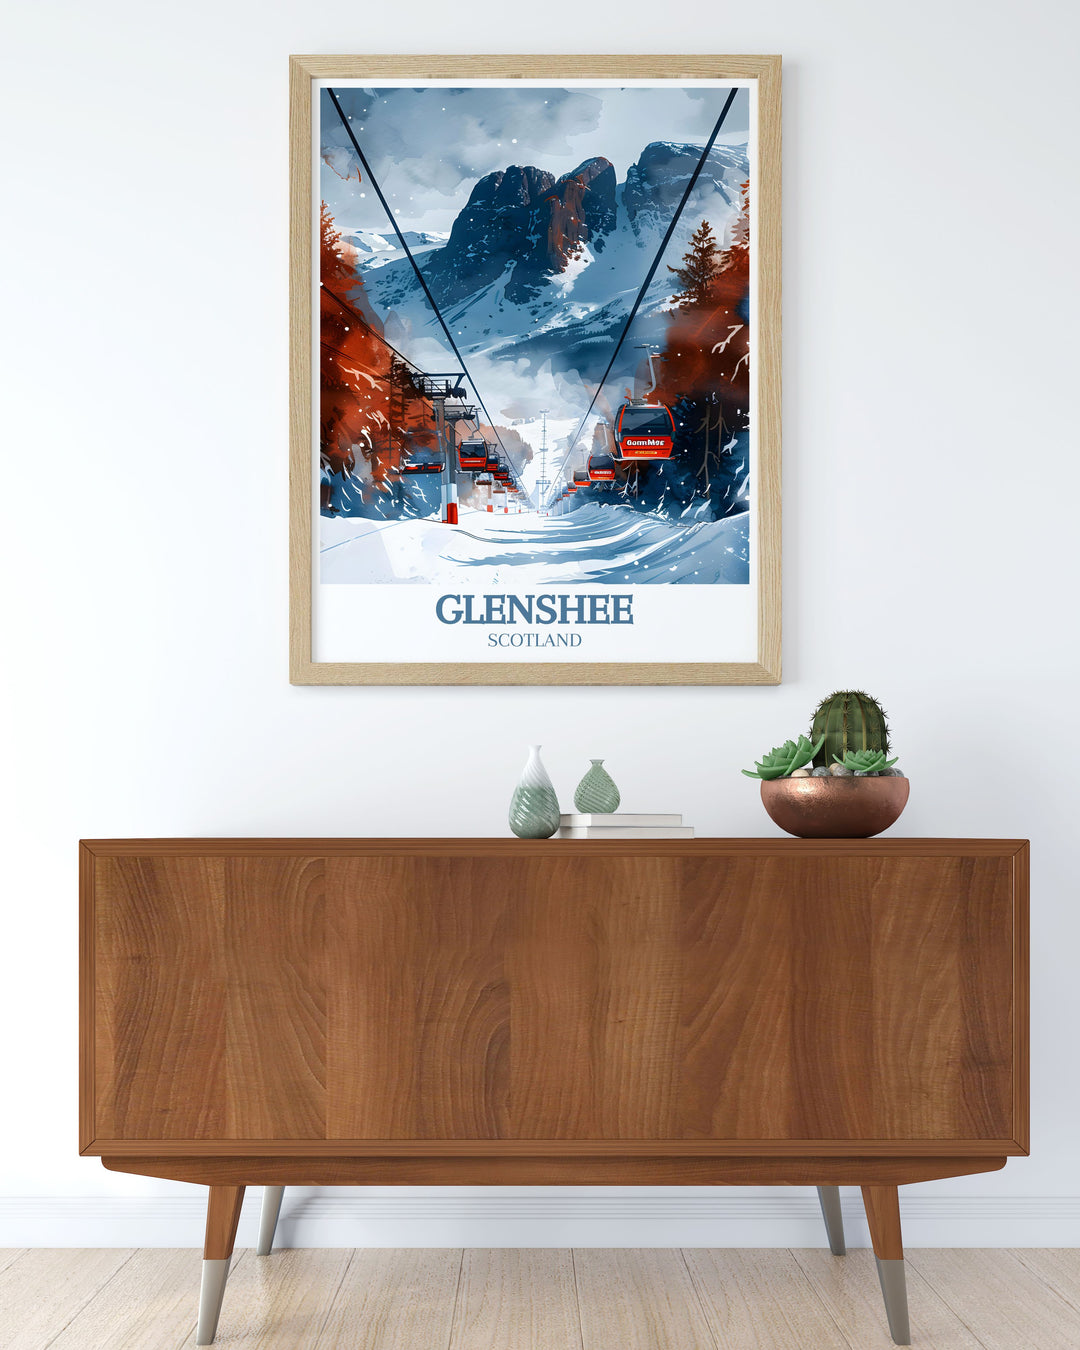 Add a touch of adventure to your home with this travel poster of Glenshee Ski Resort. The vibrant colors and intricate details highlight the resorts snow covered trails and dynamic atmosphere, making it a stunning focal point for any room.